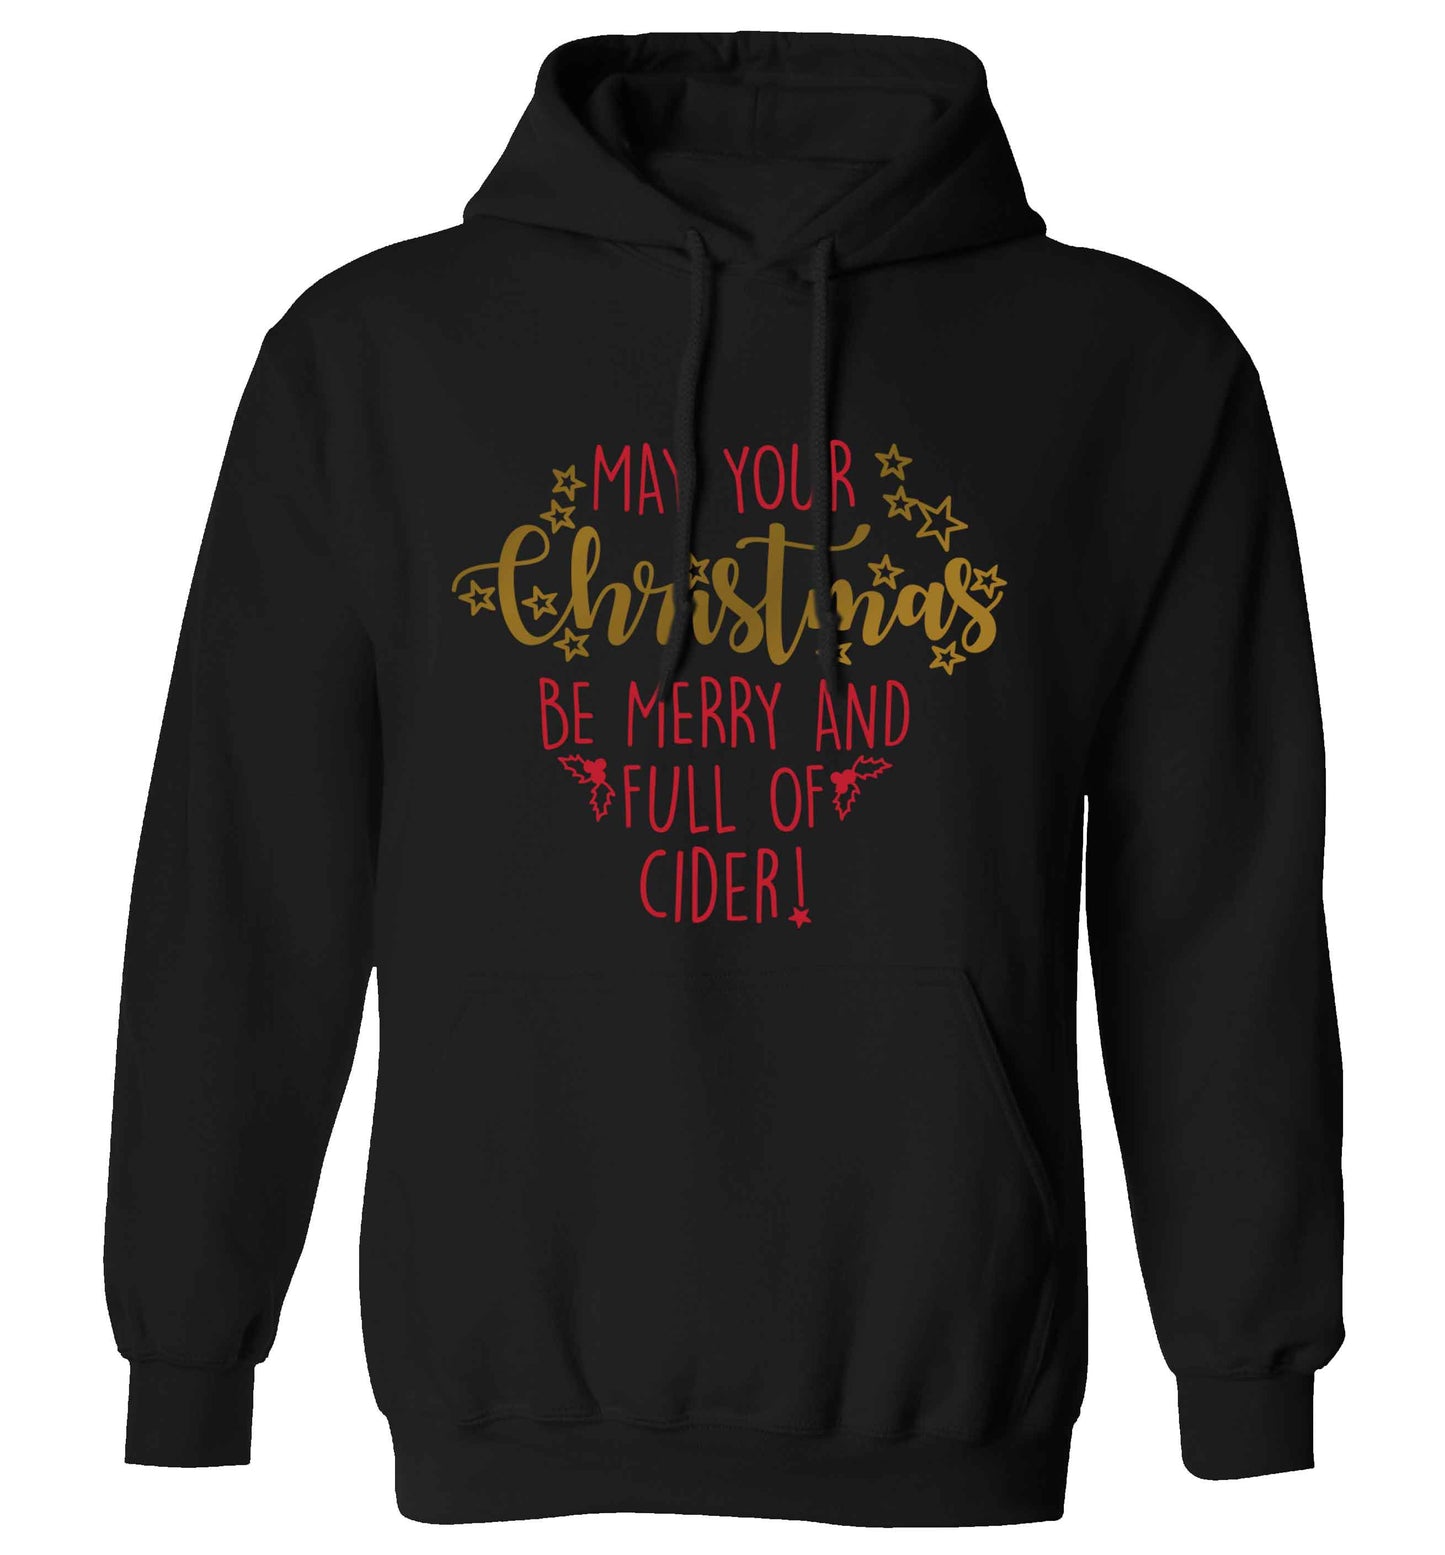 May your Christmas be merry and full of cider adults unisex black hoodie 2XL